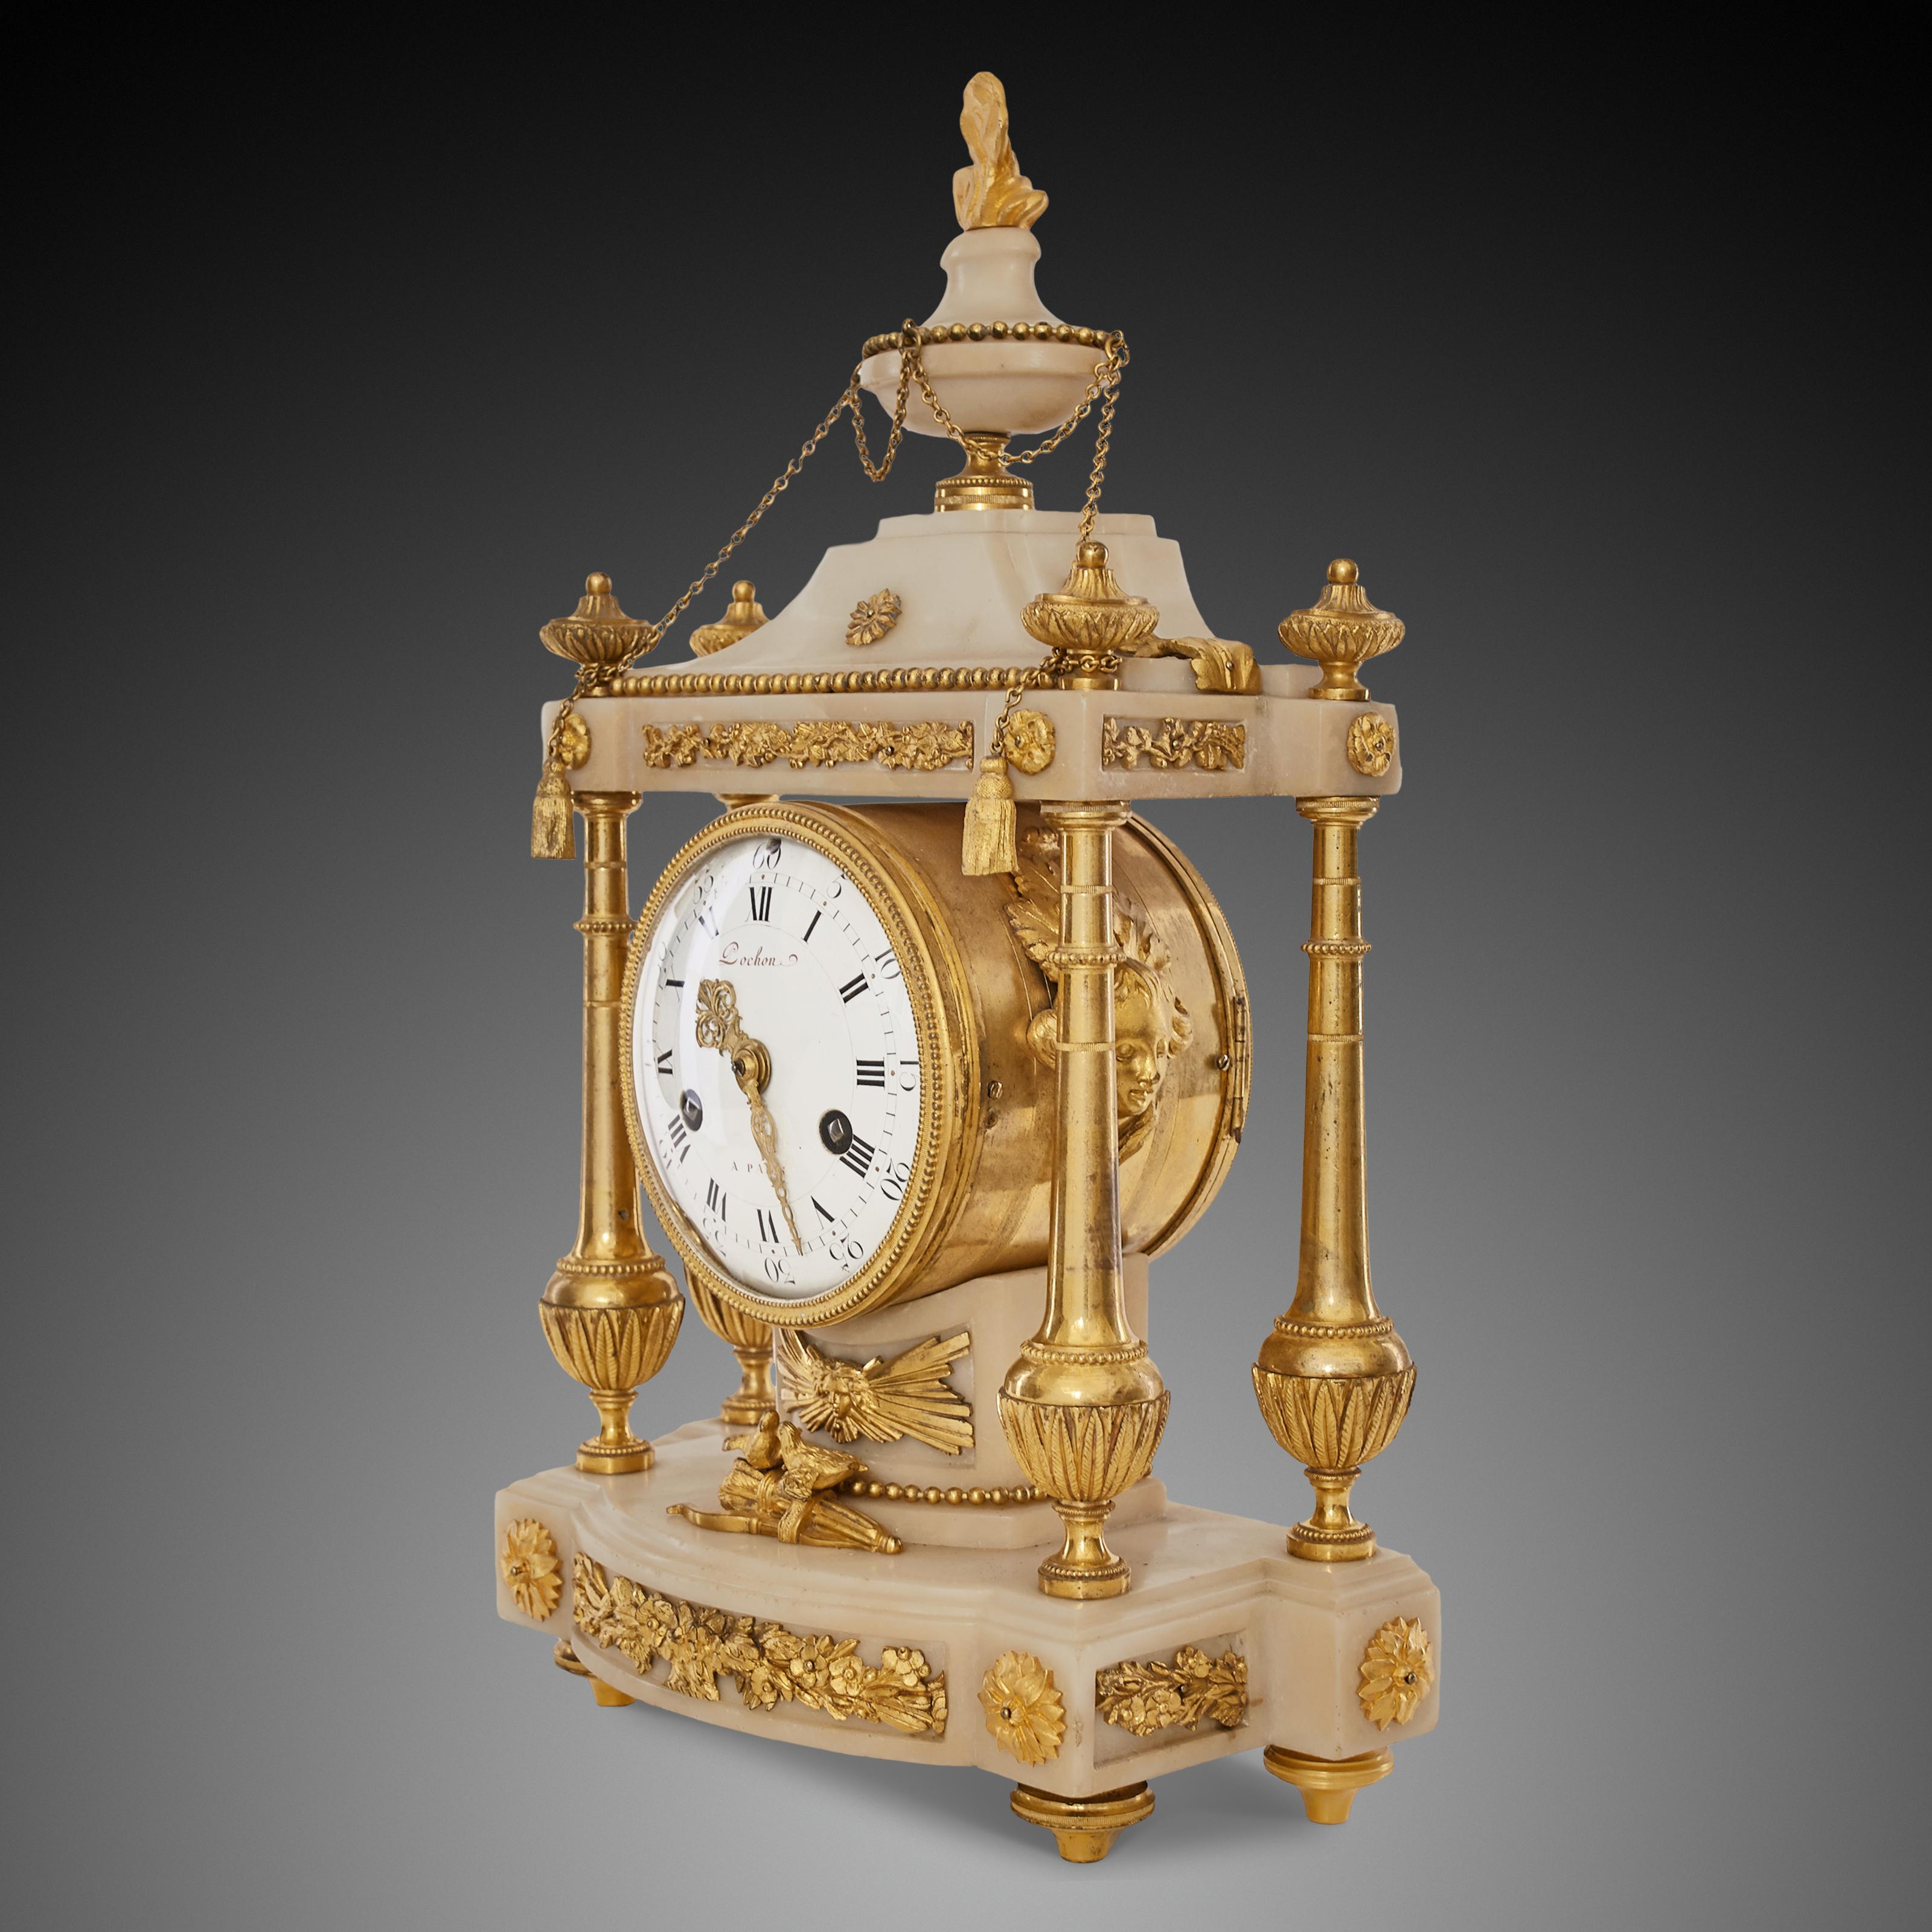 This Louis XV clock is richly decorated in gilded bronze and white marble.
The pillars, set in four delicate bronze consoles, are topped with leaf vases. This elegant decoration, columns made of white marble, rest on a marble base decorated with